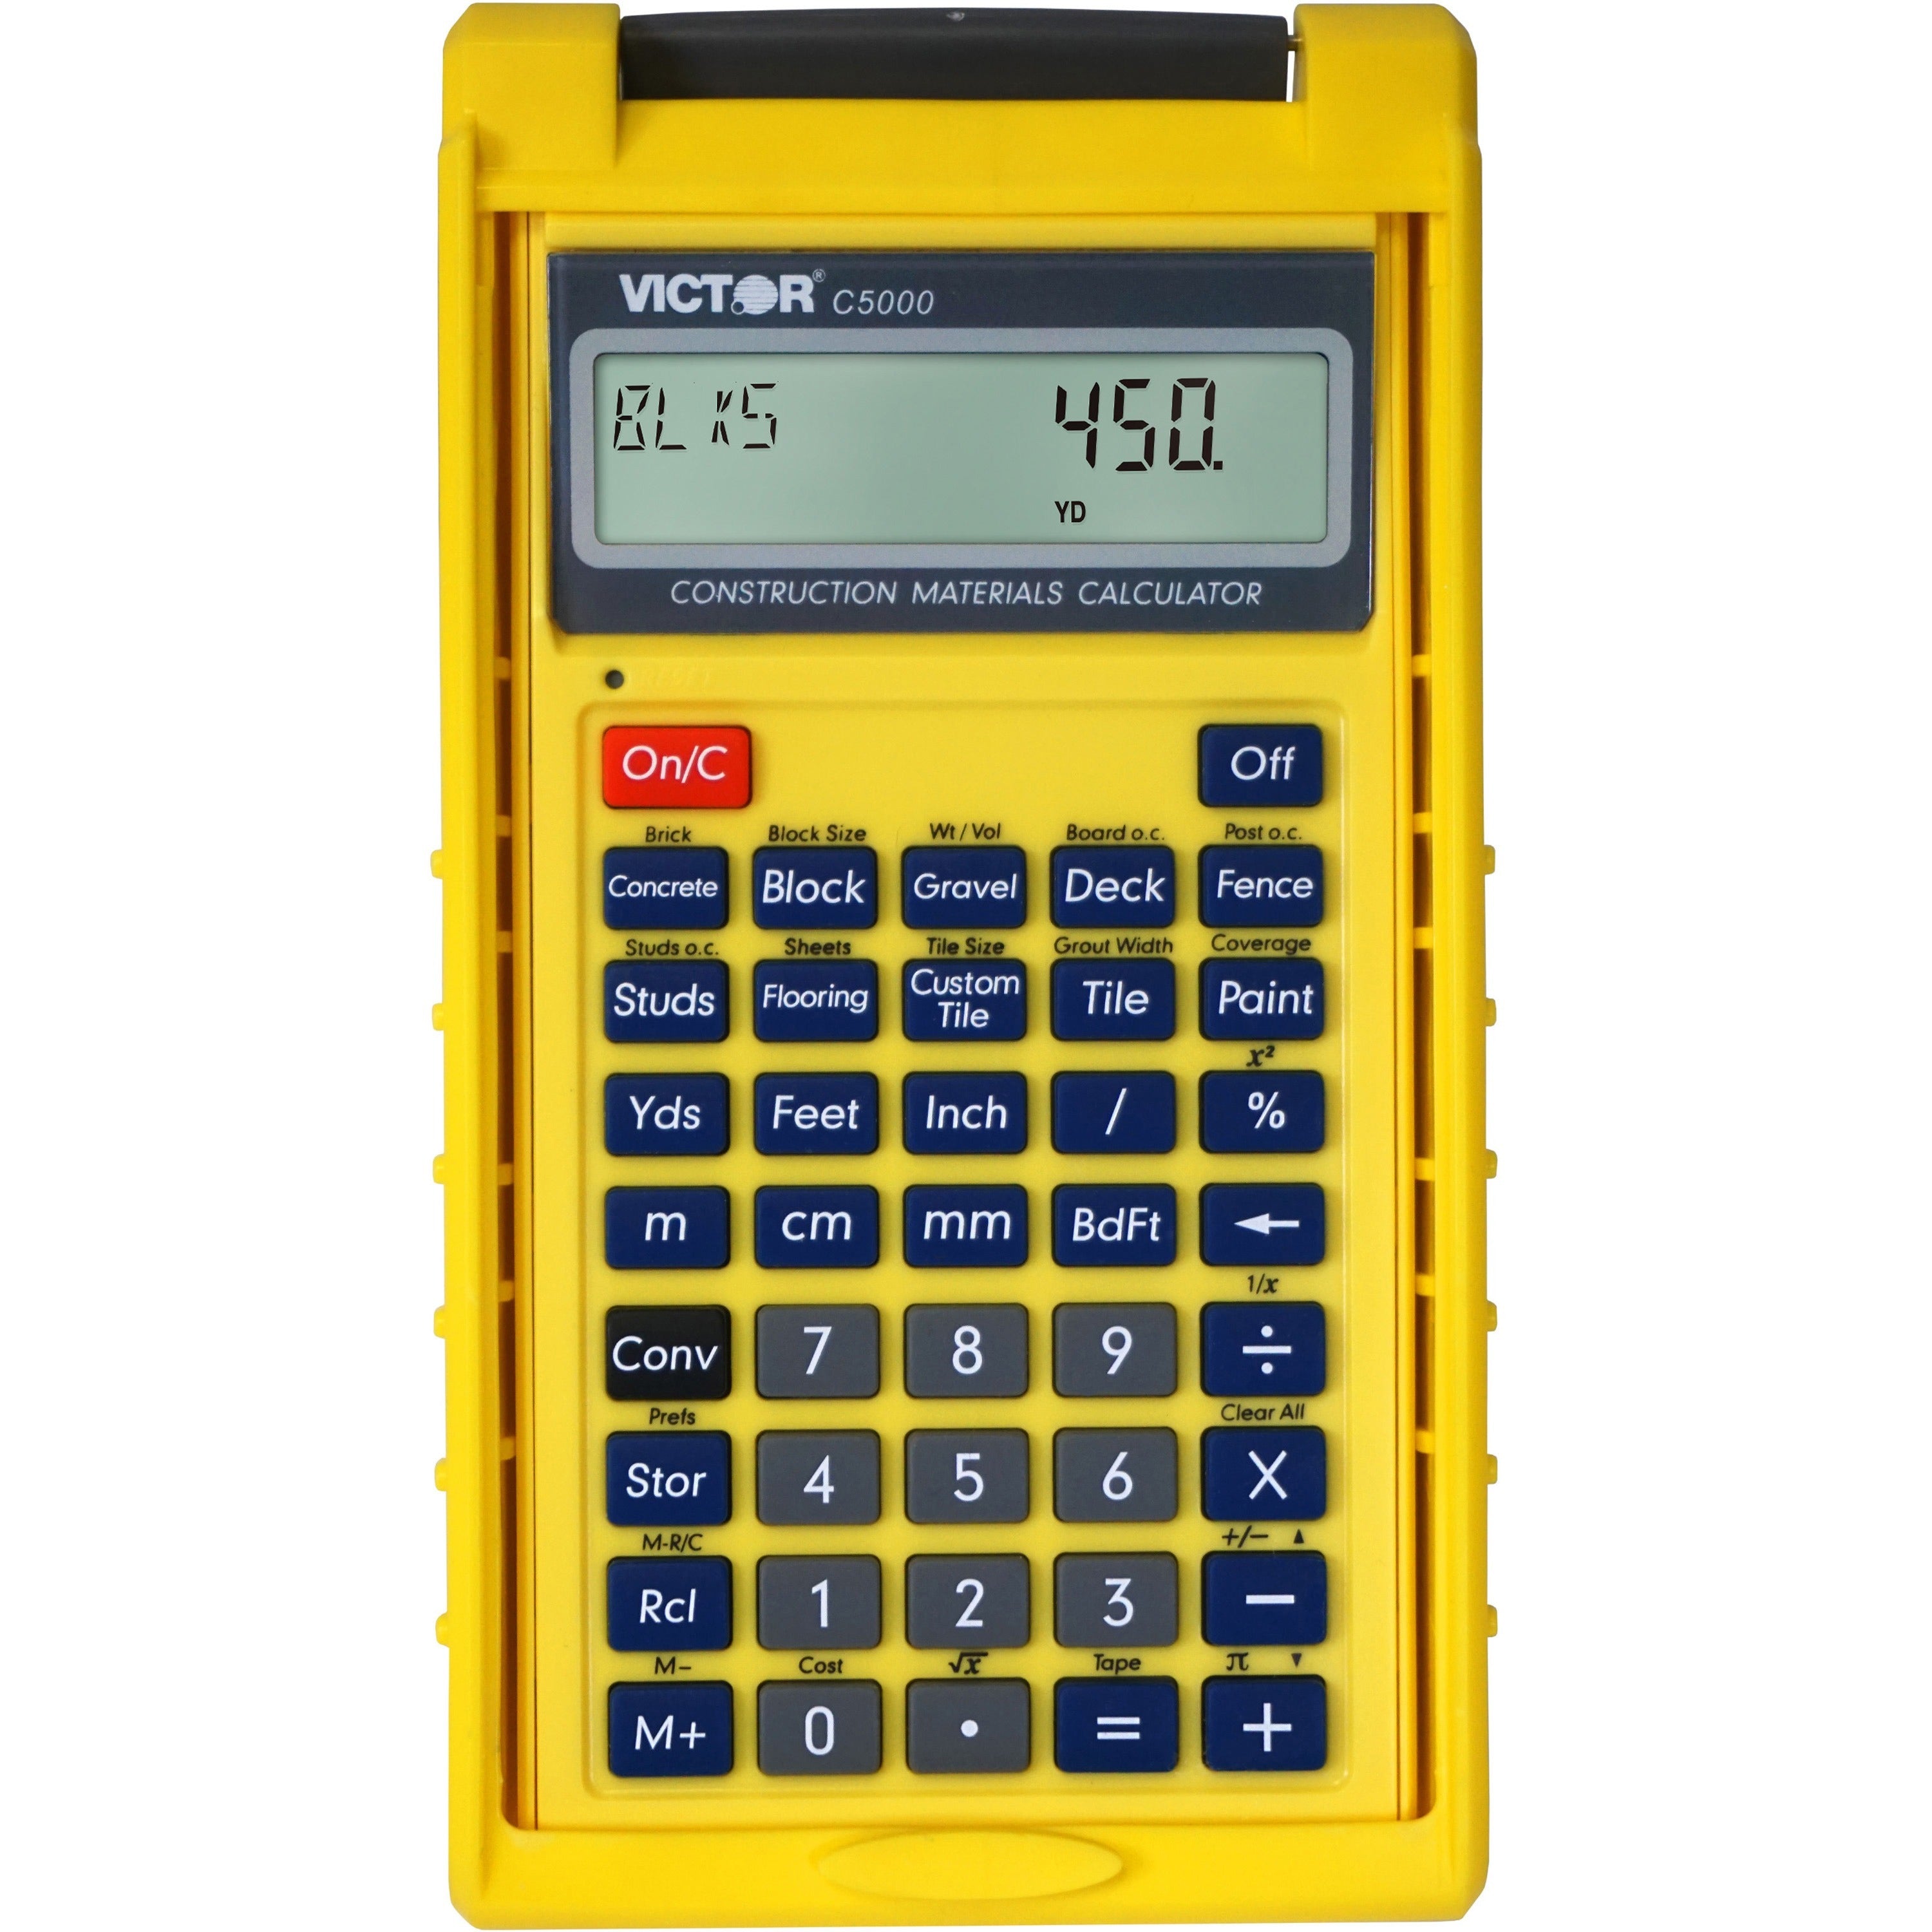 victor-c5000-construction-materials-calculator-lcd-battery-powered-2-lr44-yellow-1-each_vctc5000 - 1